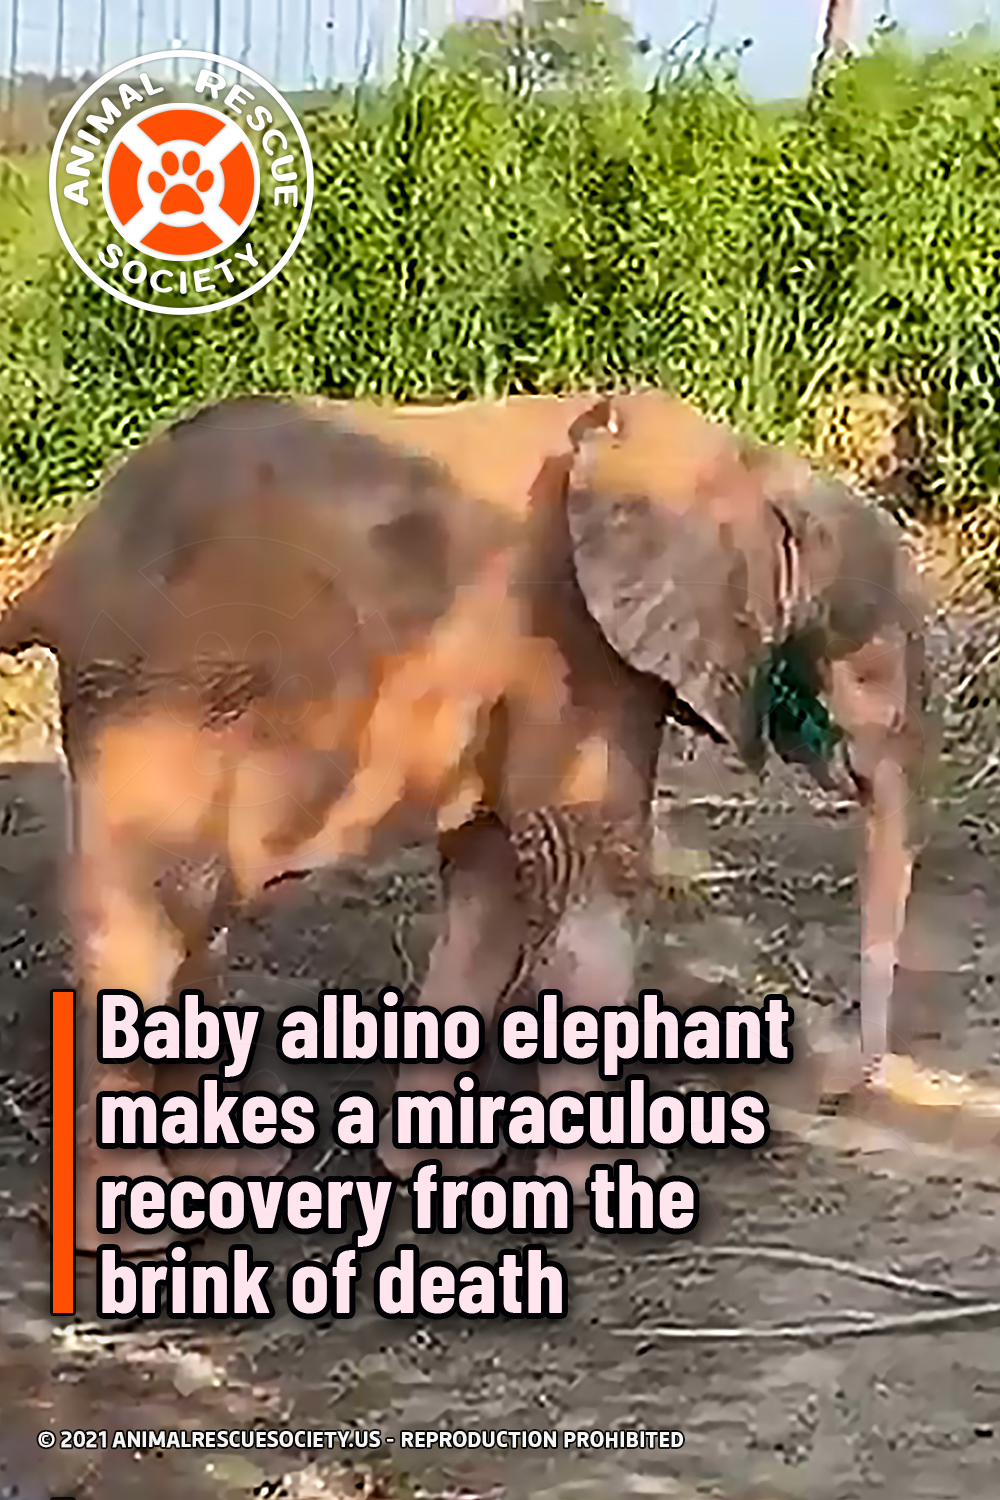 Baby albino elephant makes a miraculous recovery from the brink of death